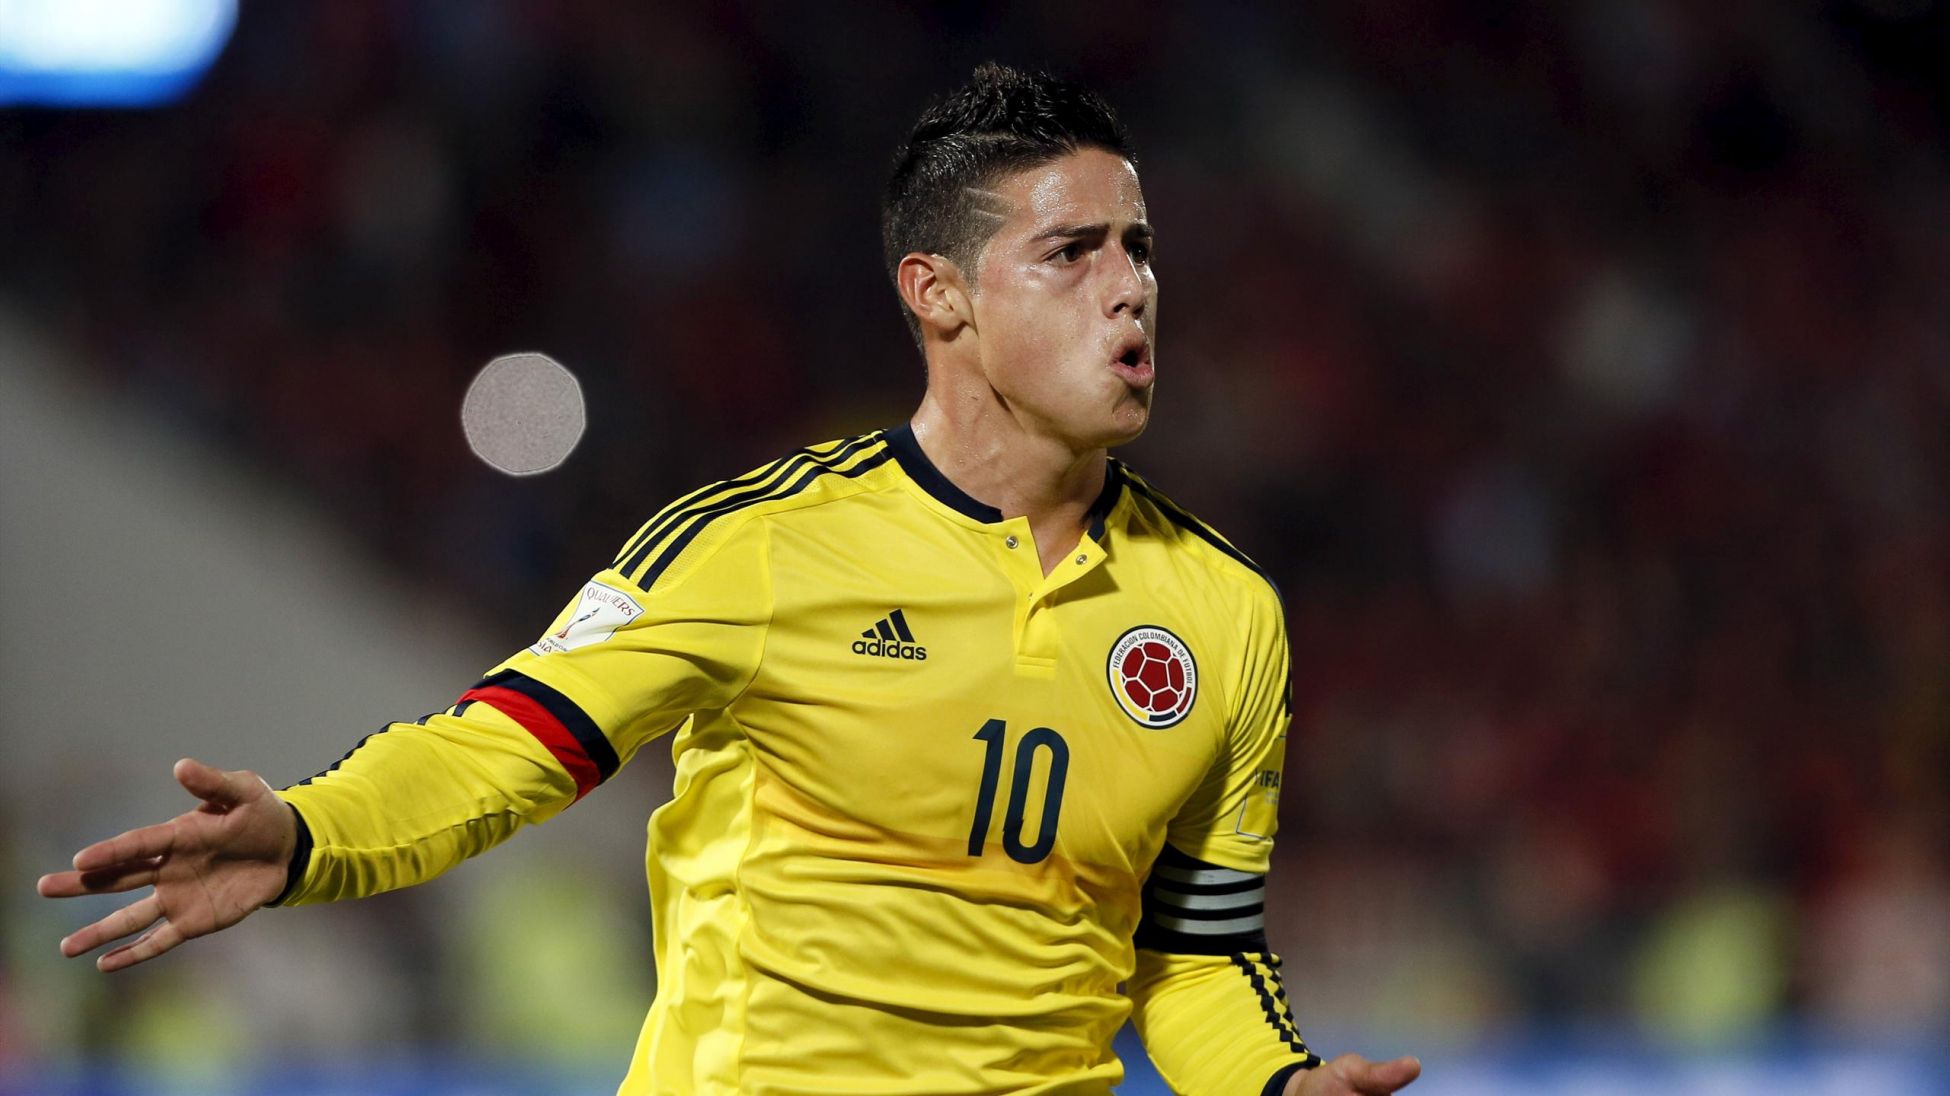 Colombian star James Rodriguez strikes in the second half against Chile in the 2018 World Cup qualifying to make it 1-1.